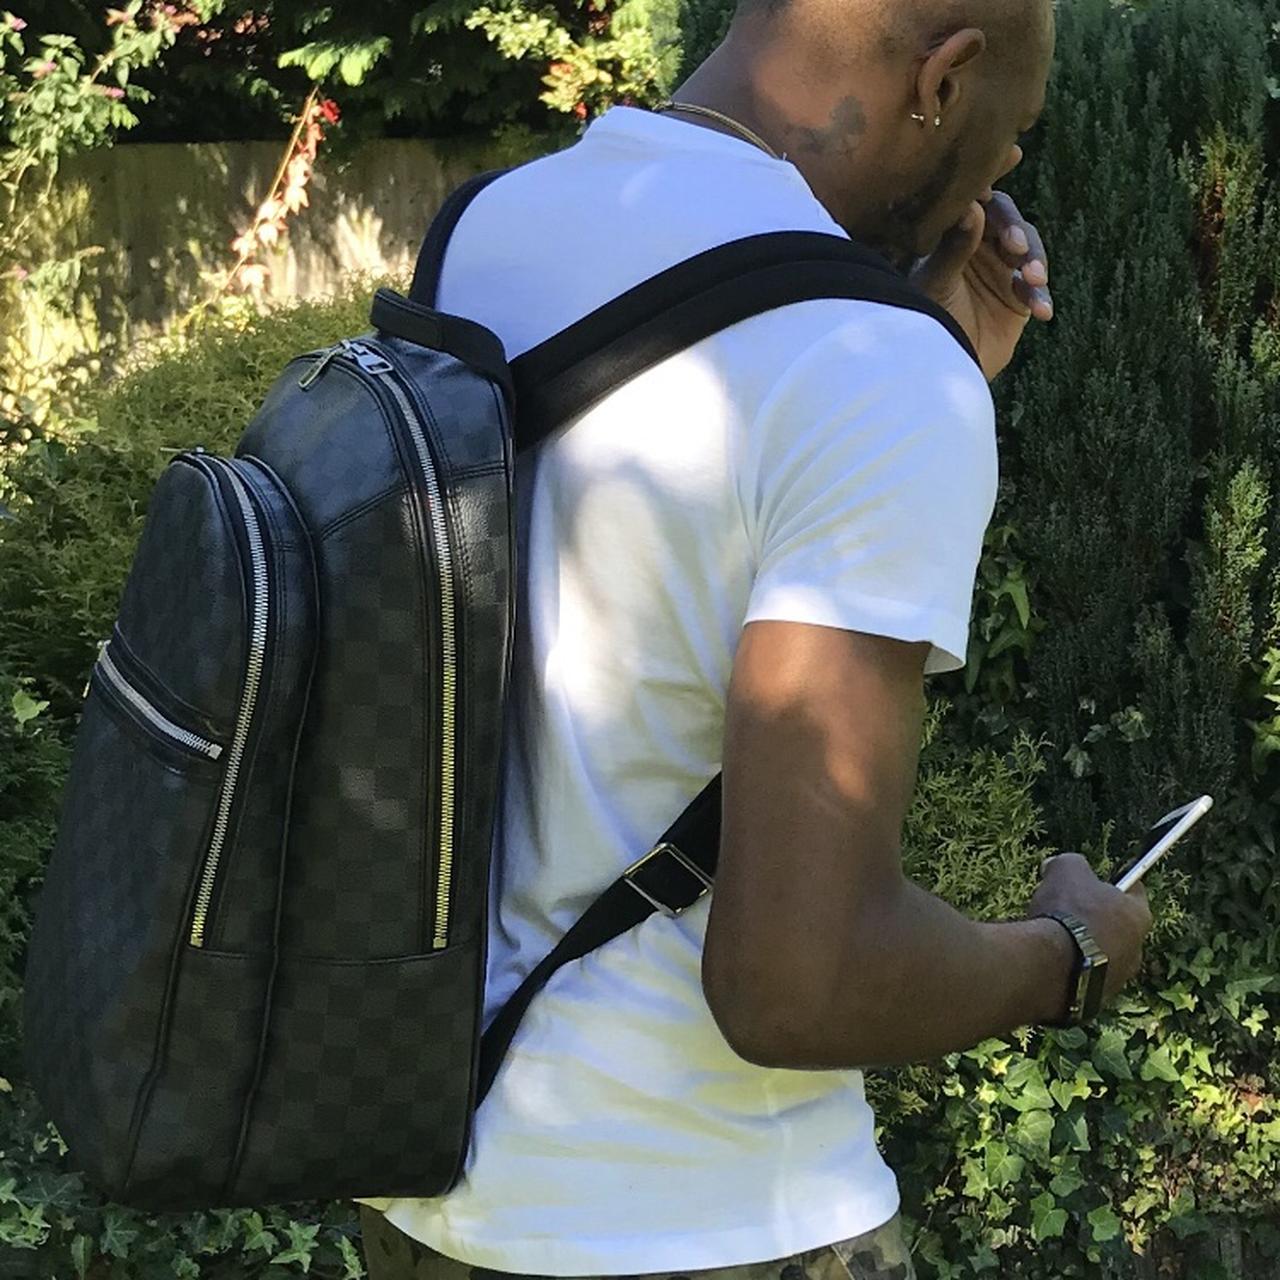 vuitton hiking backpack